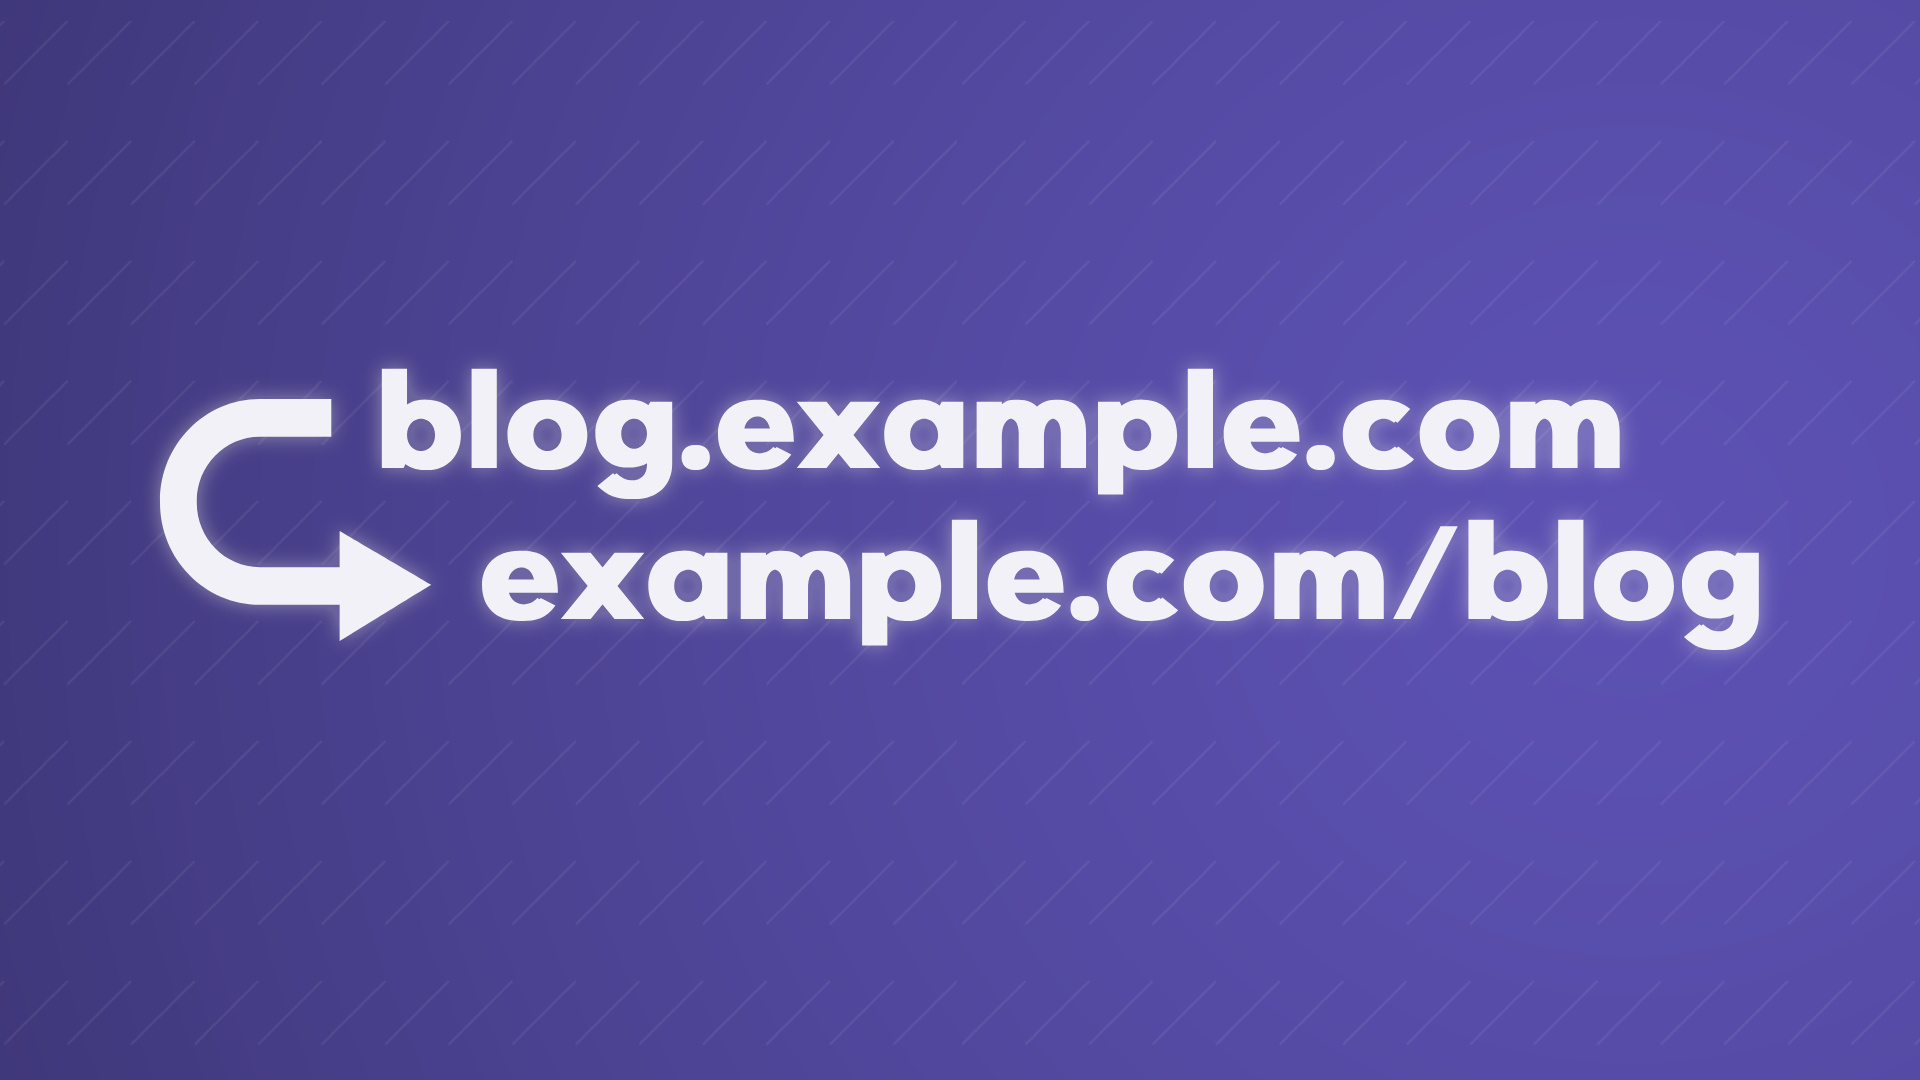 "Blog.example.com to example.com/blog" using subdomain as subdirectory Cloudflare